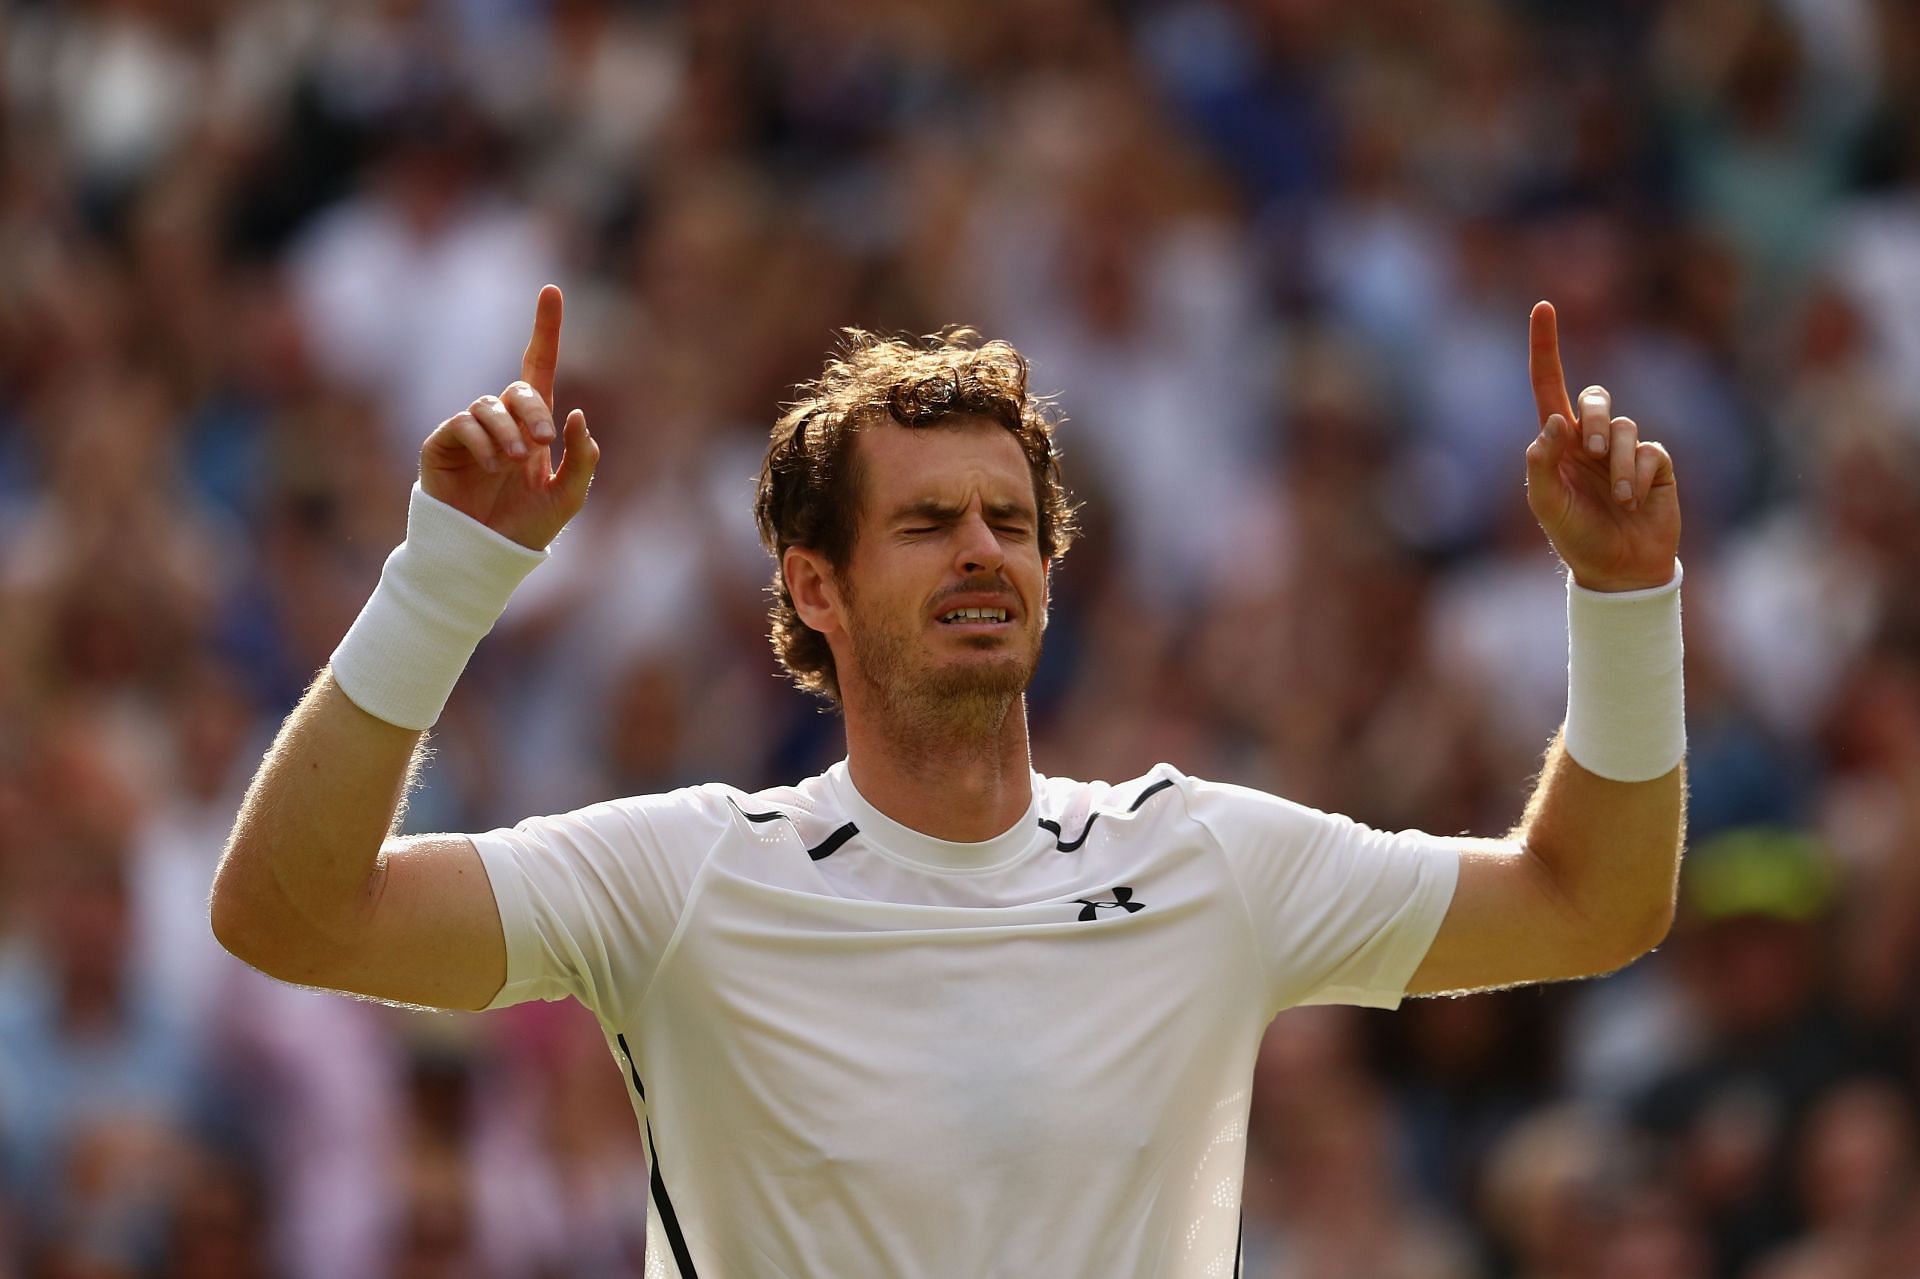 Andy Murray became World No.1 during the dominant era of the Big-3